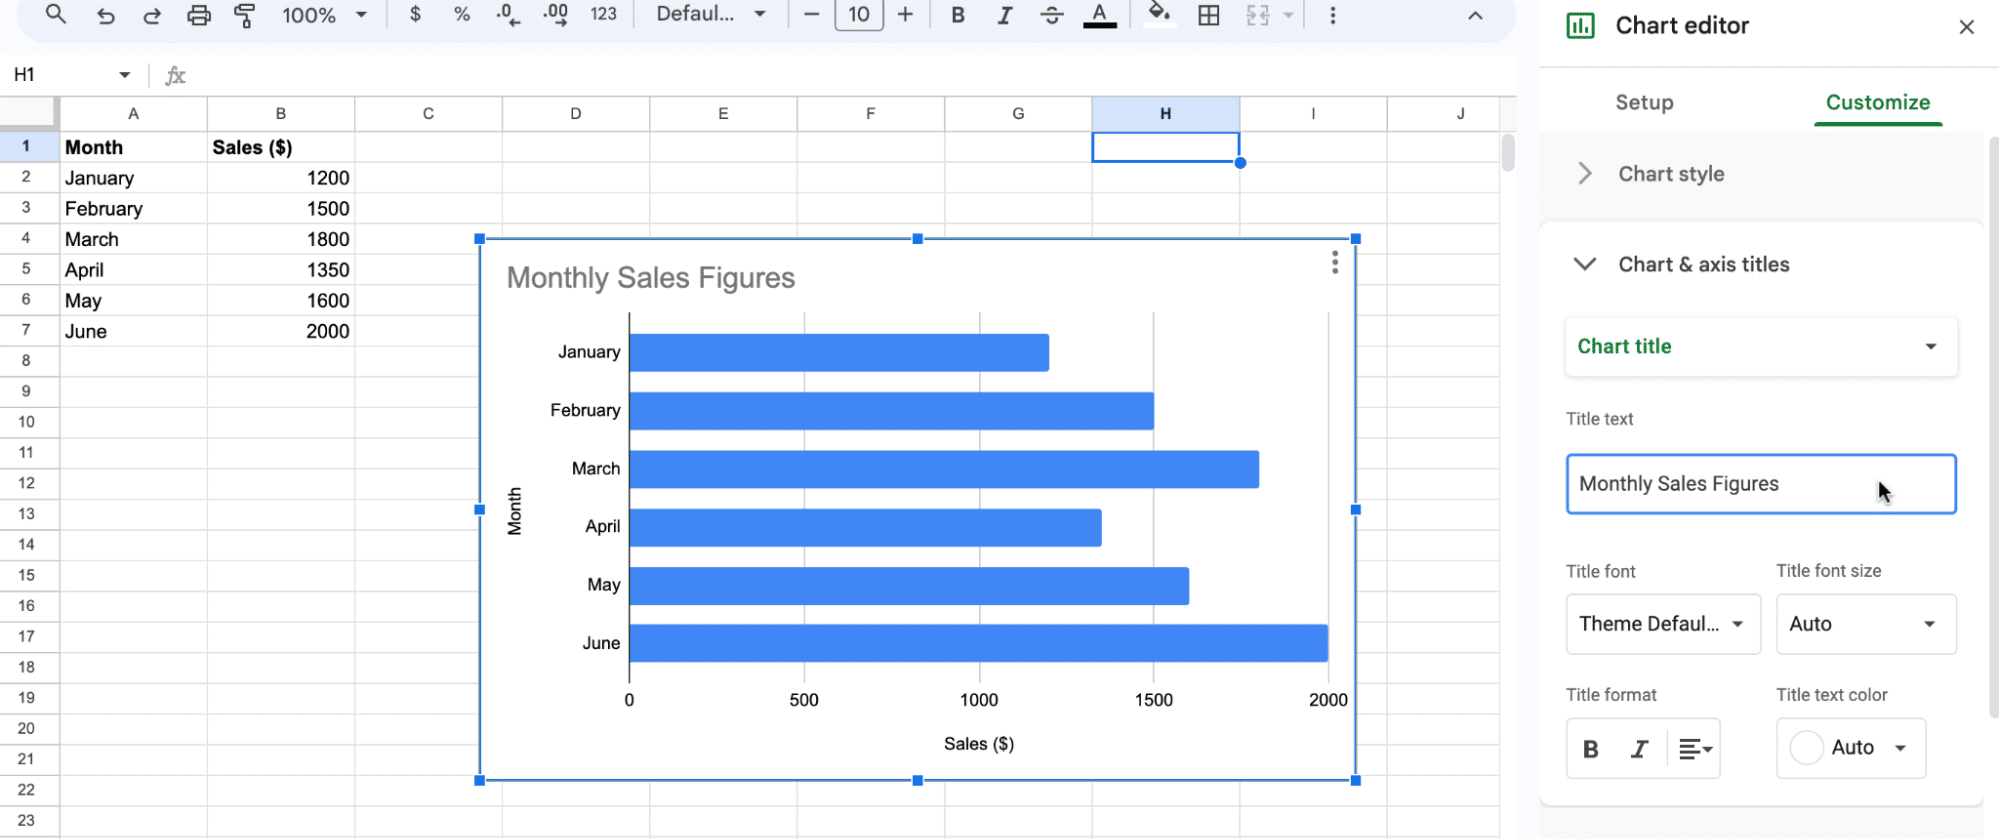 Example of a Bar graph in Google Sheets comparing product sales